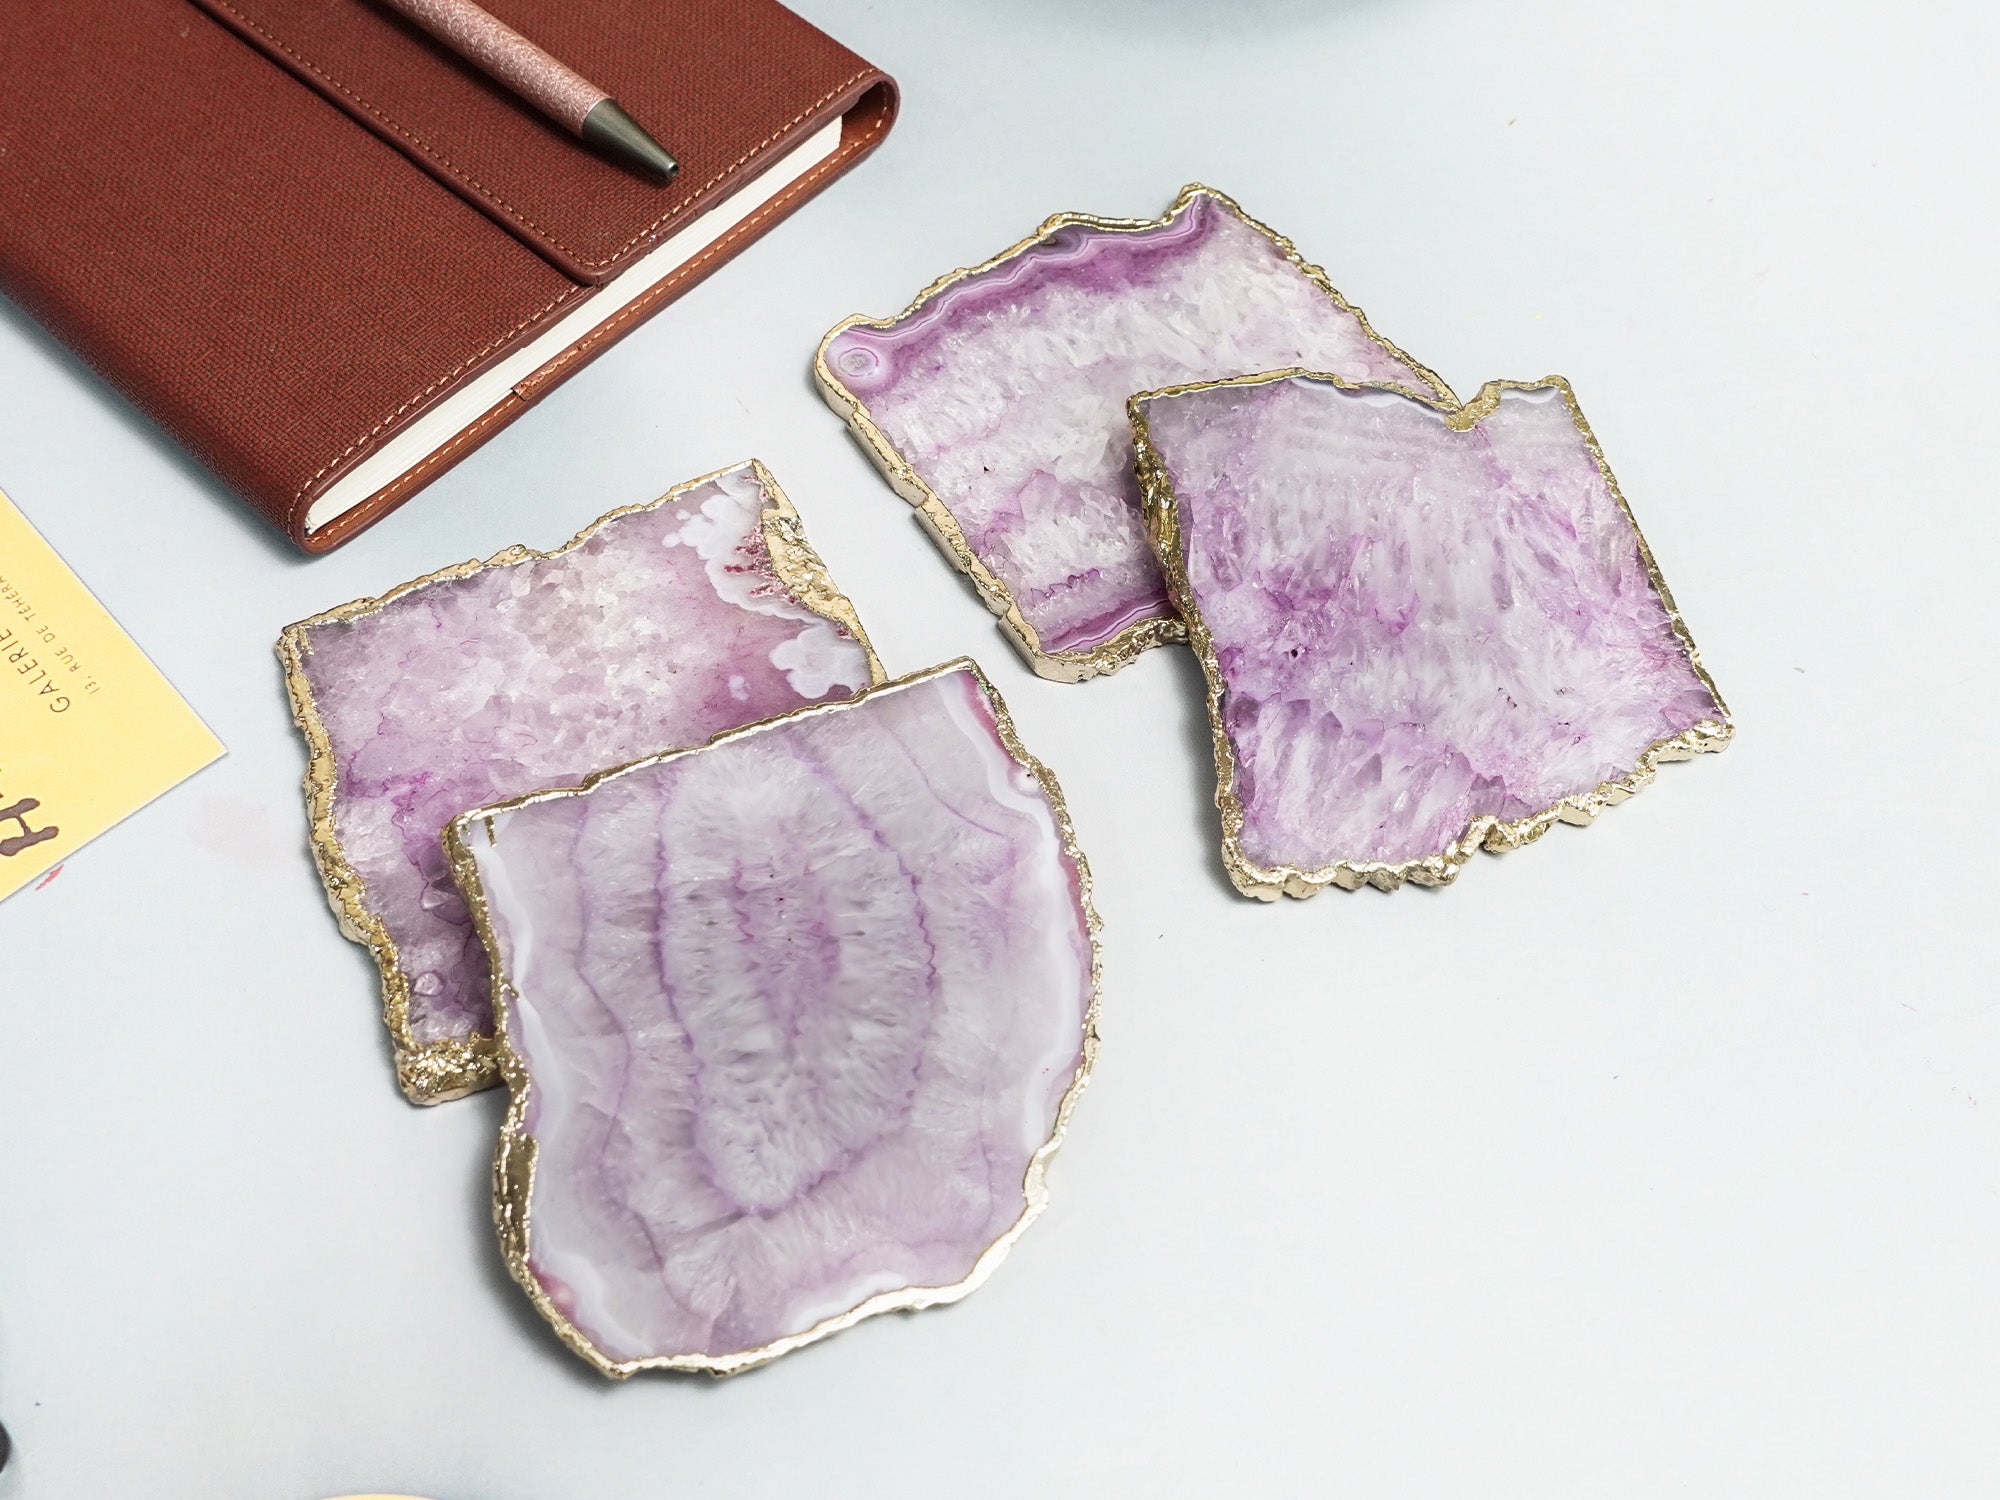 Egypt BIBELOT Agate Handcrafted Luxury Coasters l Gold plated Coasters (Pink)